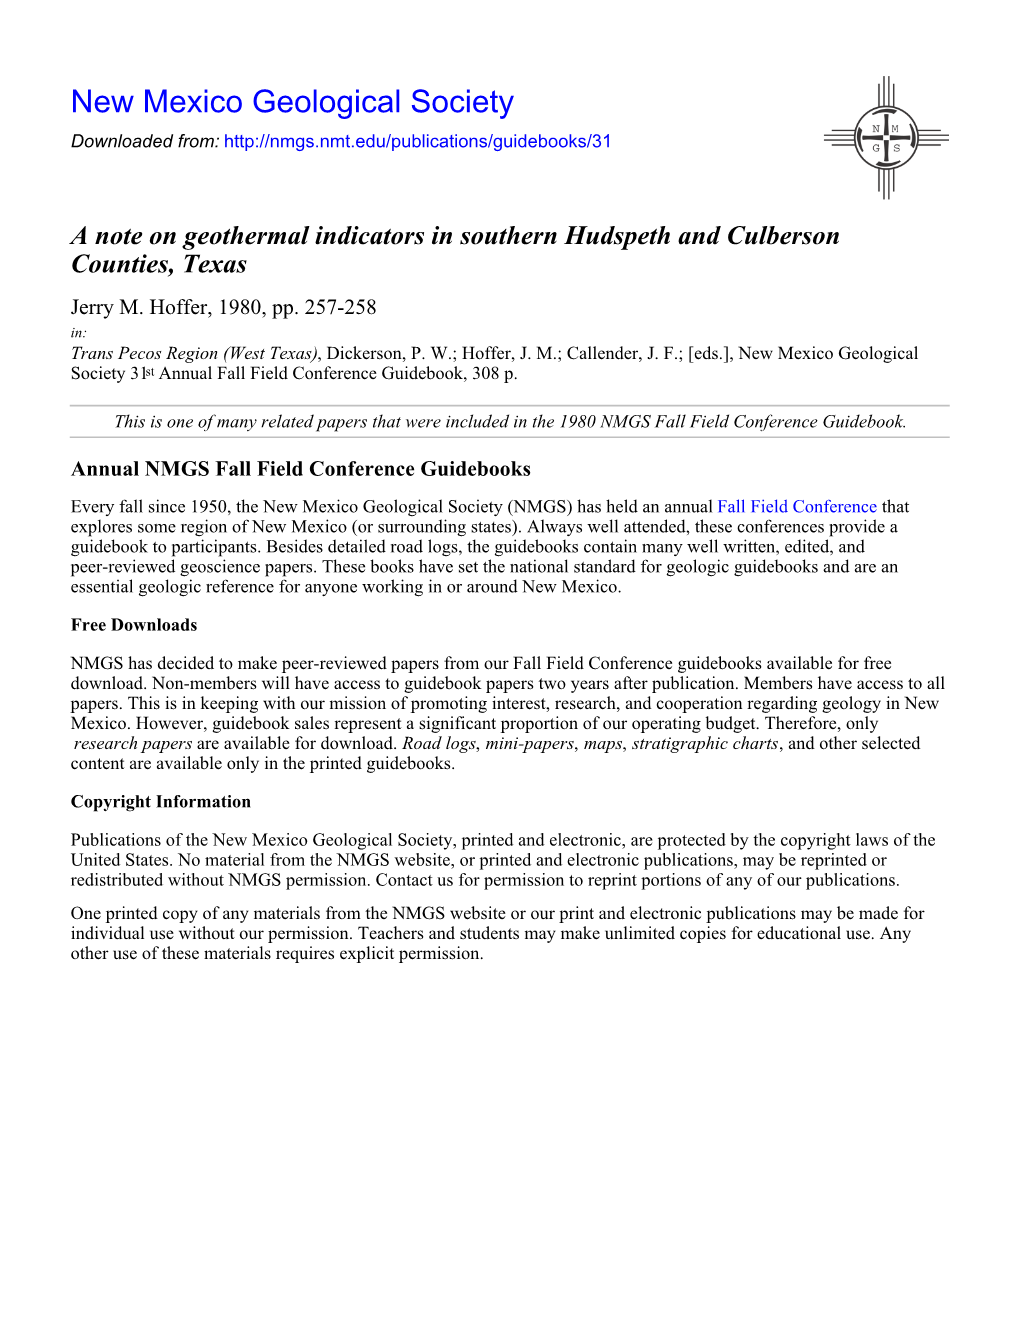 A Note on Geothermal Indicators in Southern Hudspeth and Culberson Counties, Texas Jerry M